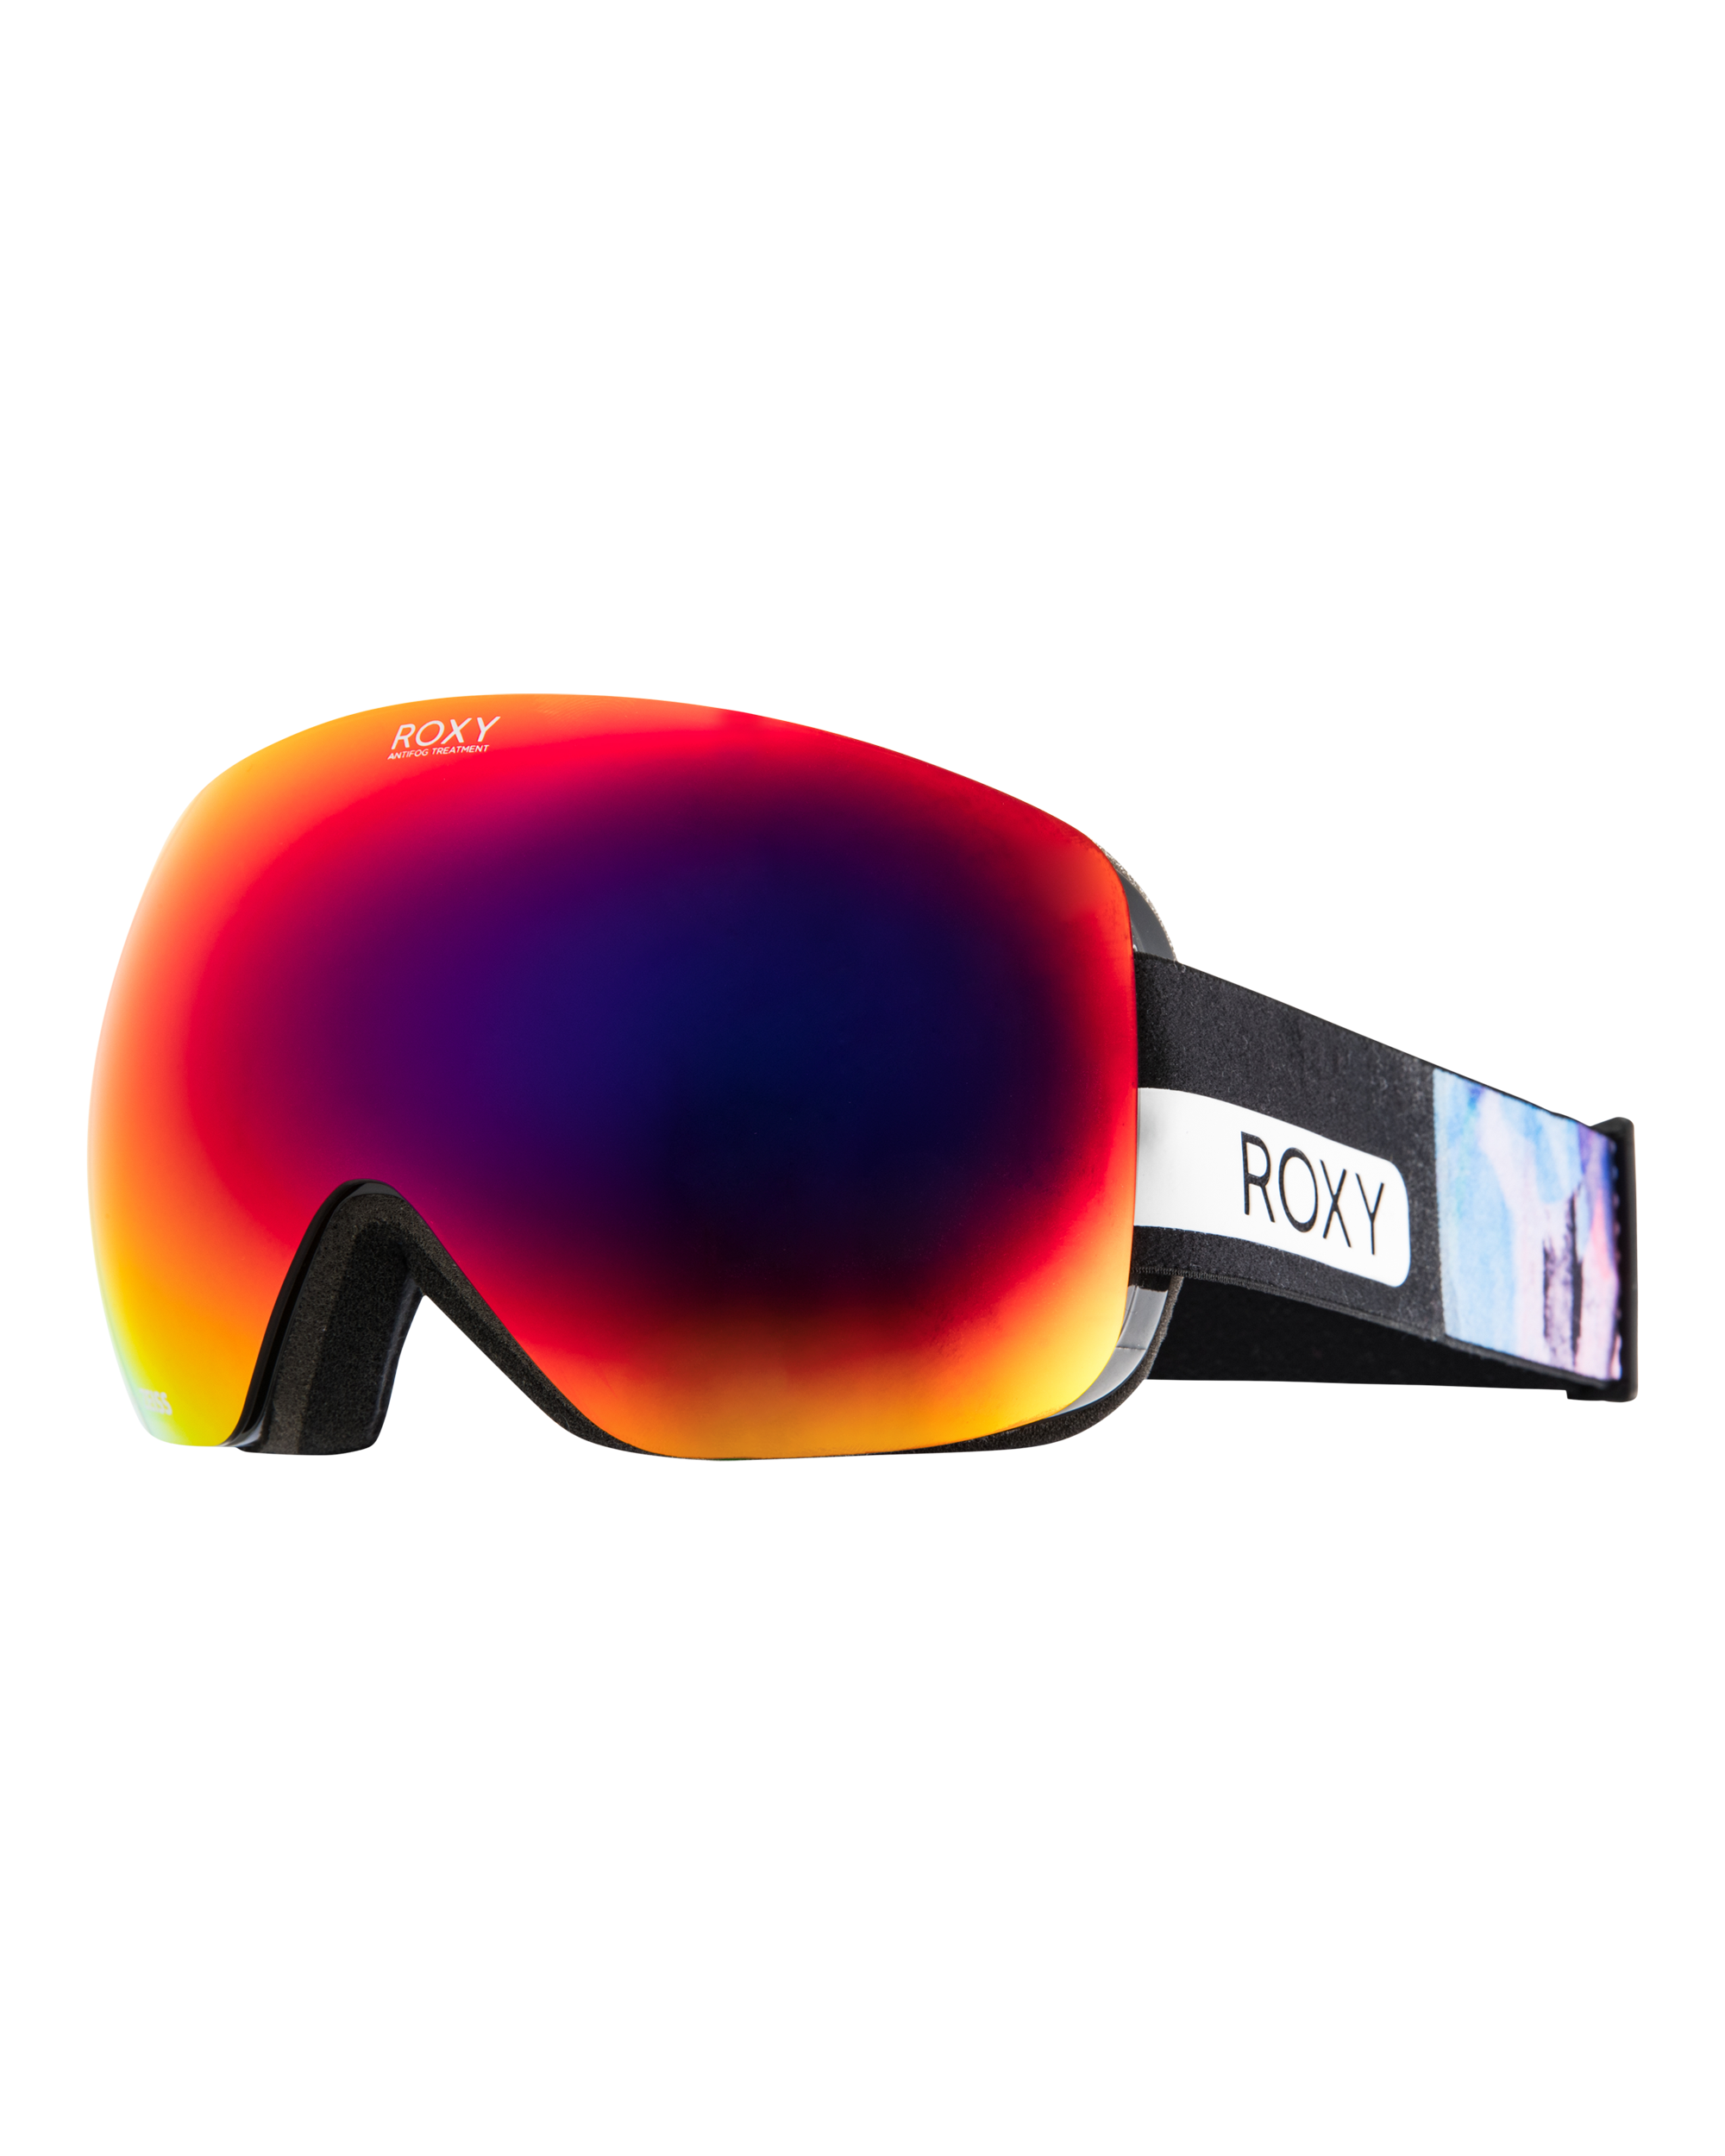 ROSEWOOD Goggles